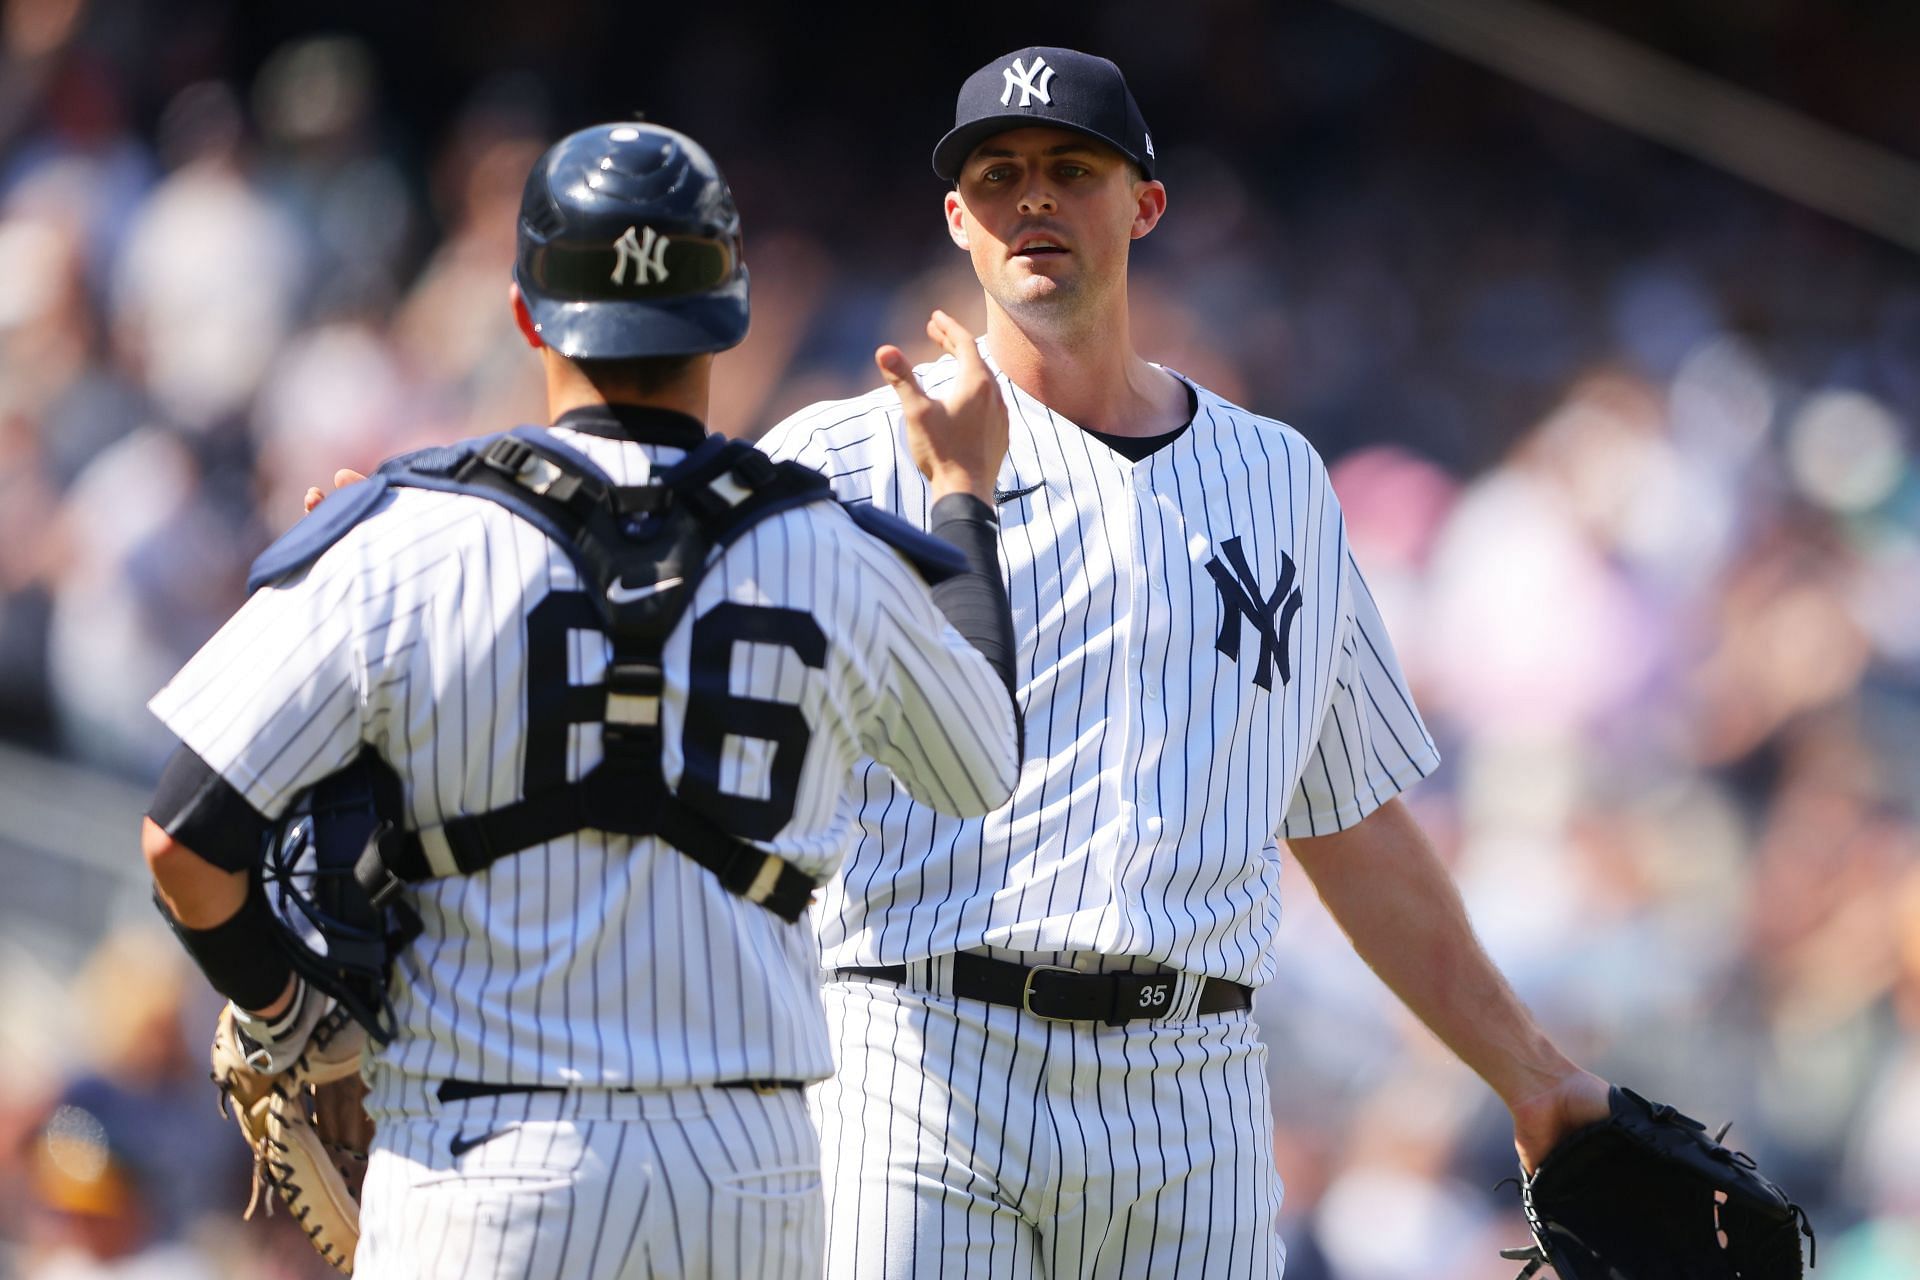 Yankees reliever Clay Holmes seems to have found groove again